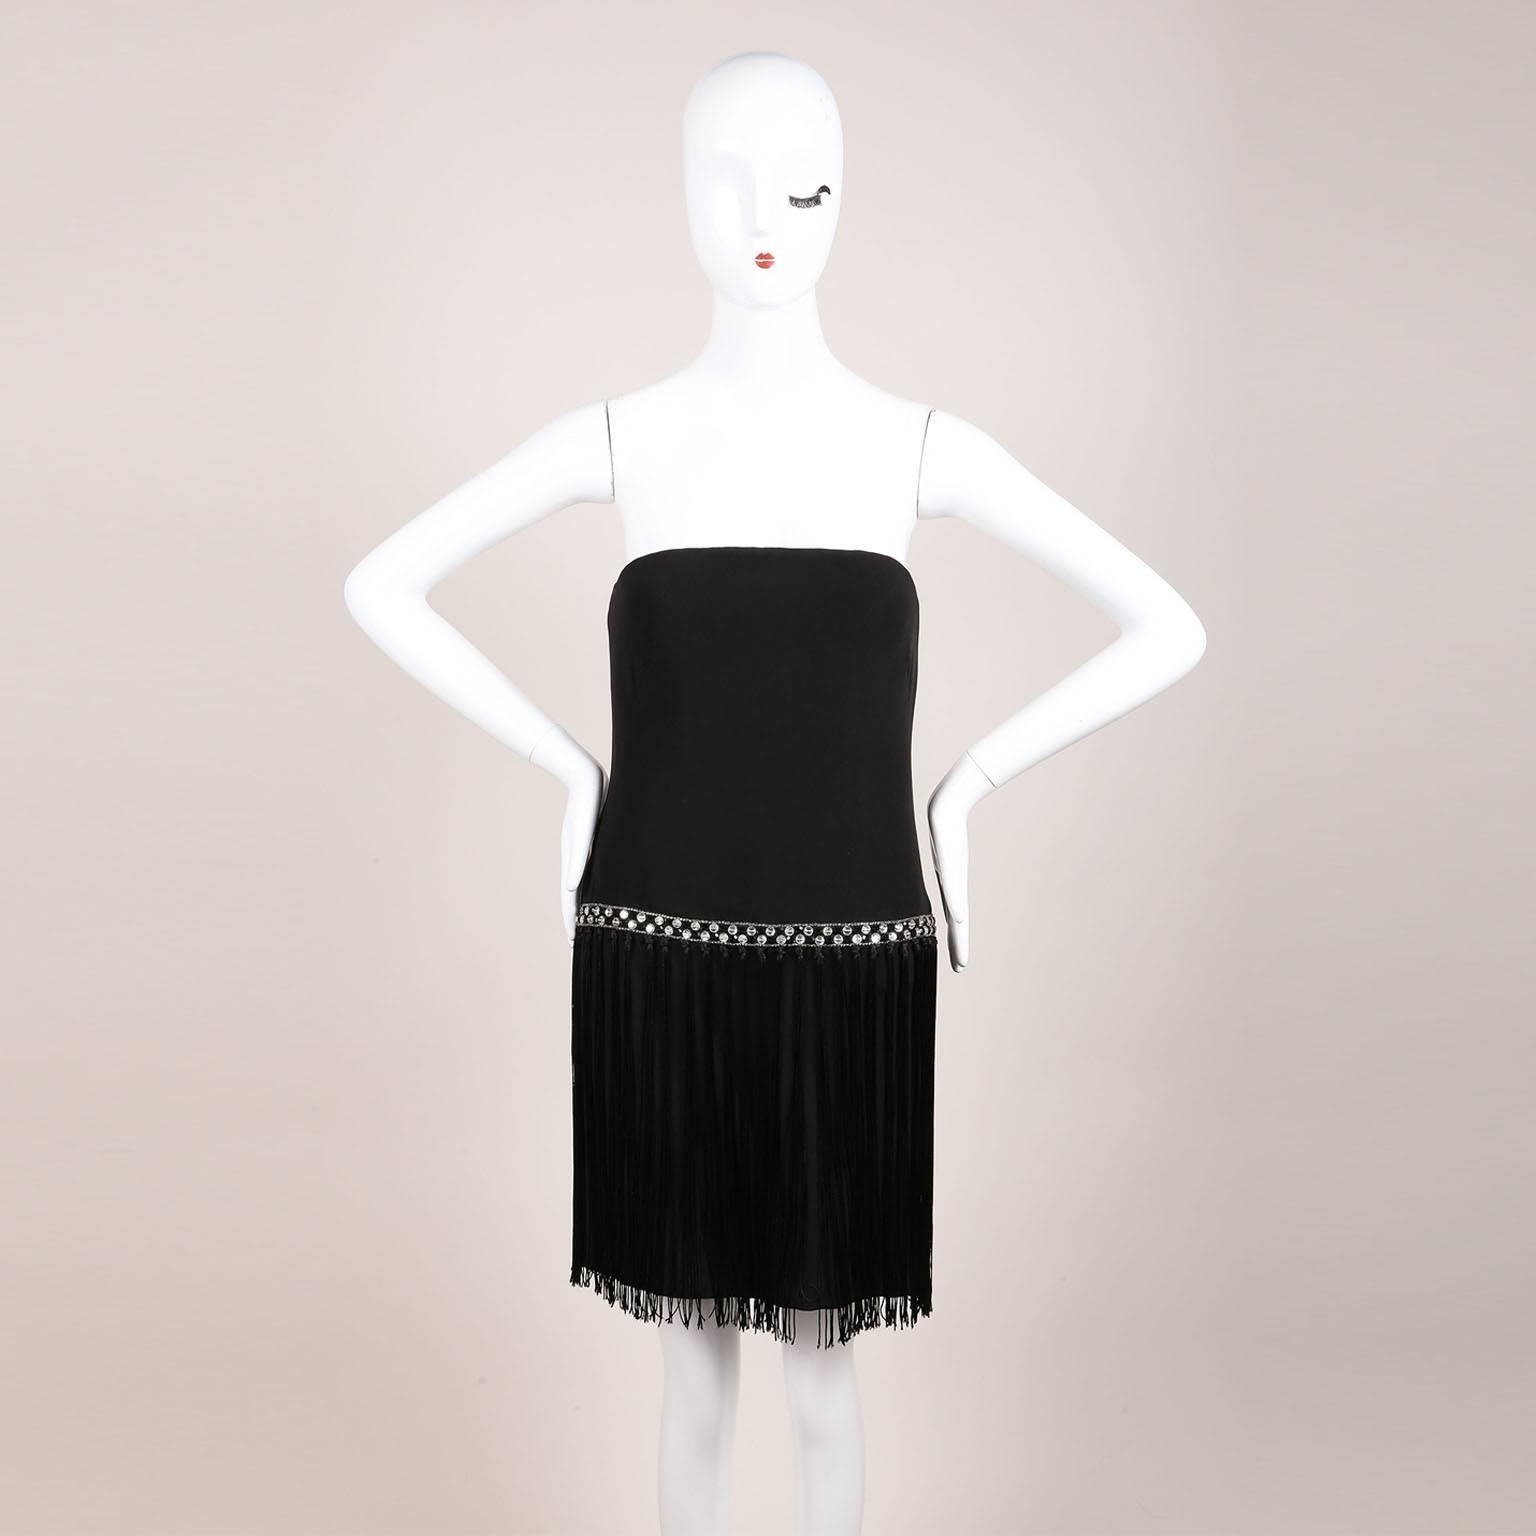 This short black strapless dress features a very subtle sweetheart neckline with clear and black rhinestone and bead embellishment at waist.  Knotted fringe tassel trim from waist down skirt. Back zip fastening. Padded bust and boning bodice